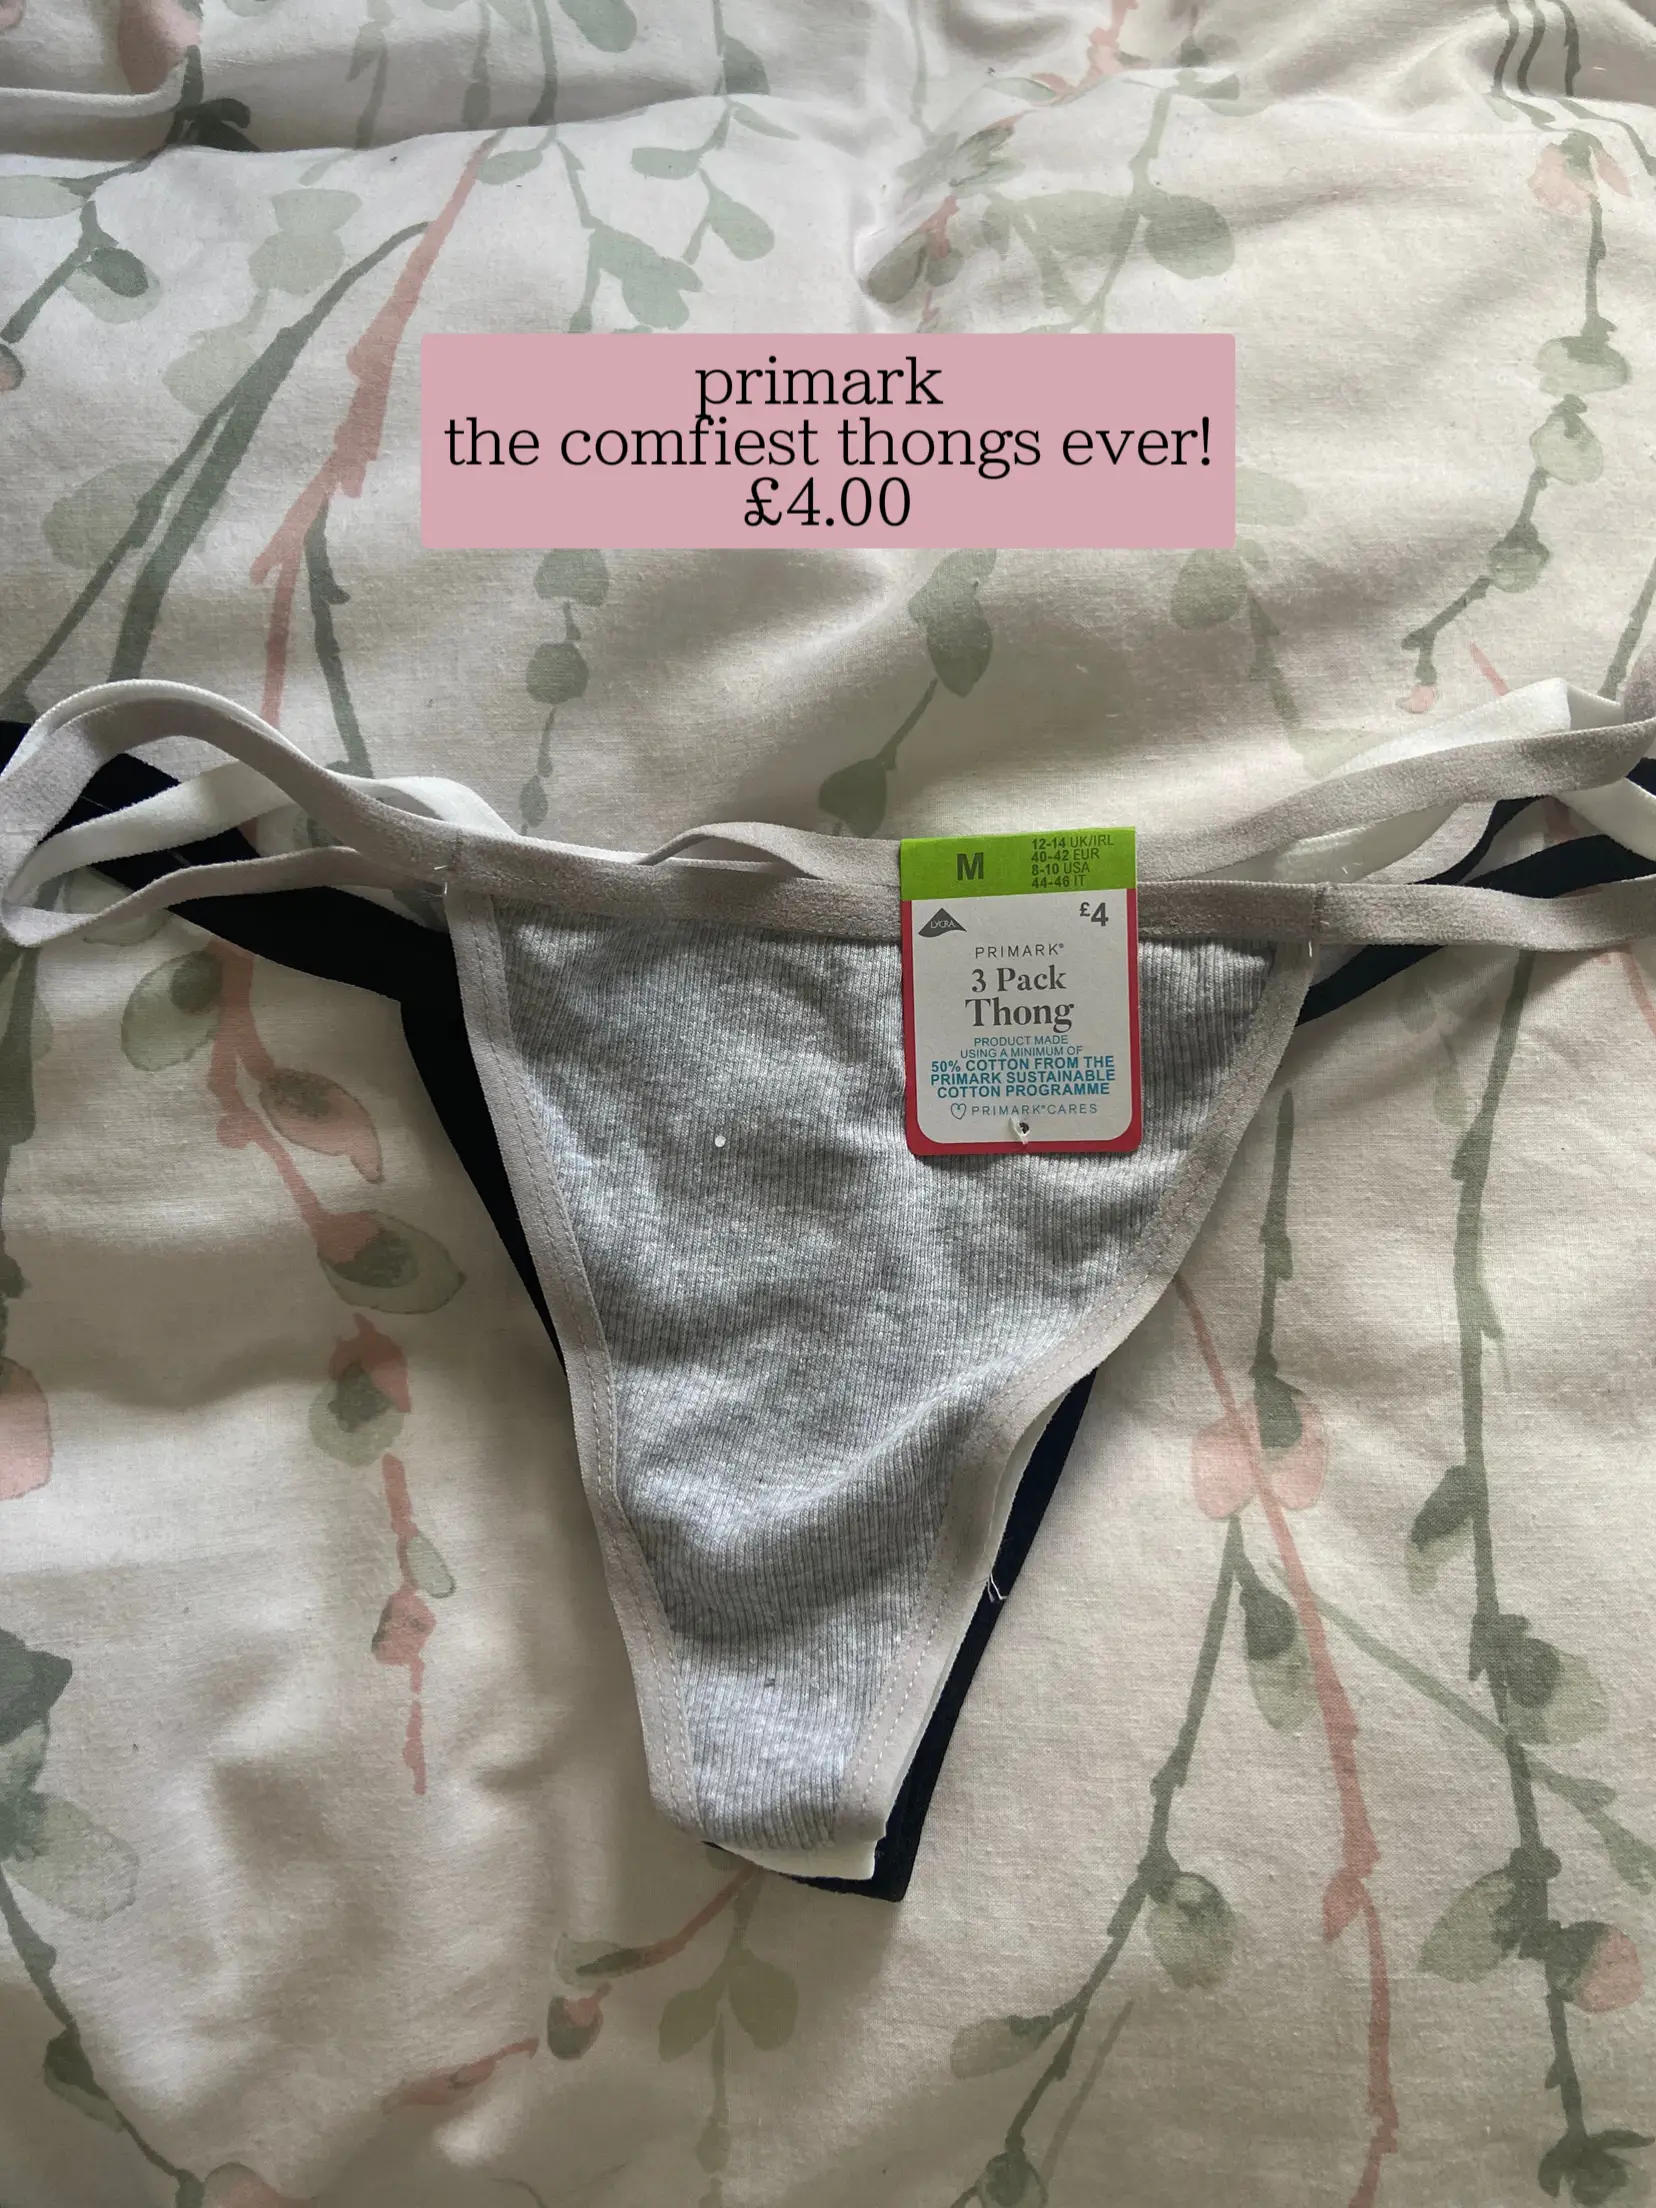 shopping haul - primark, h&m and boots🛒, Gallery posted by lottie🦖